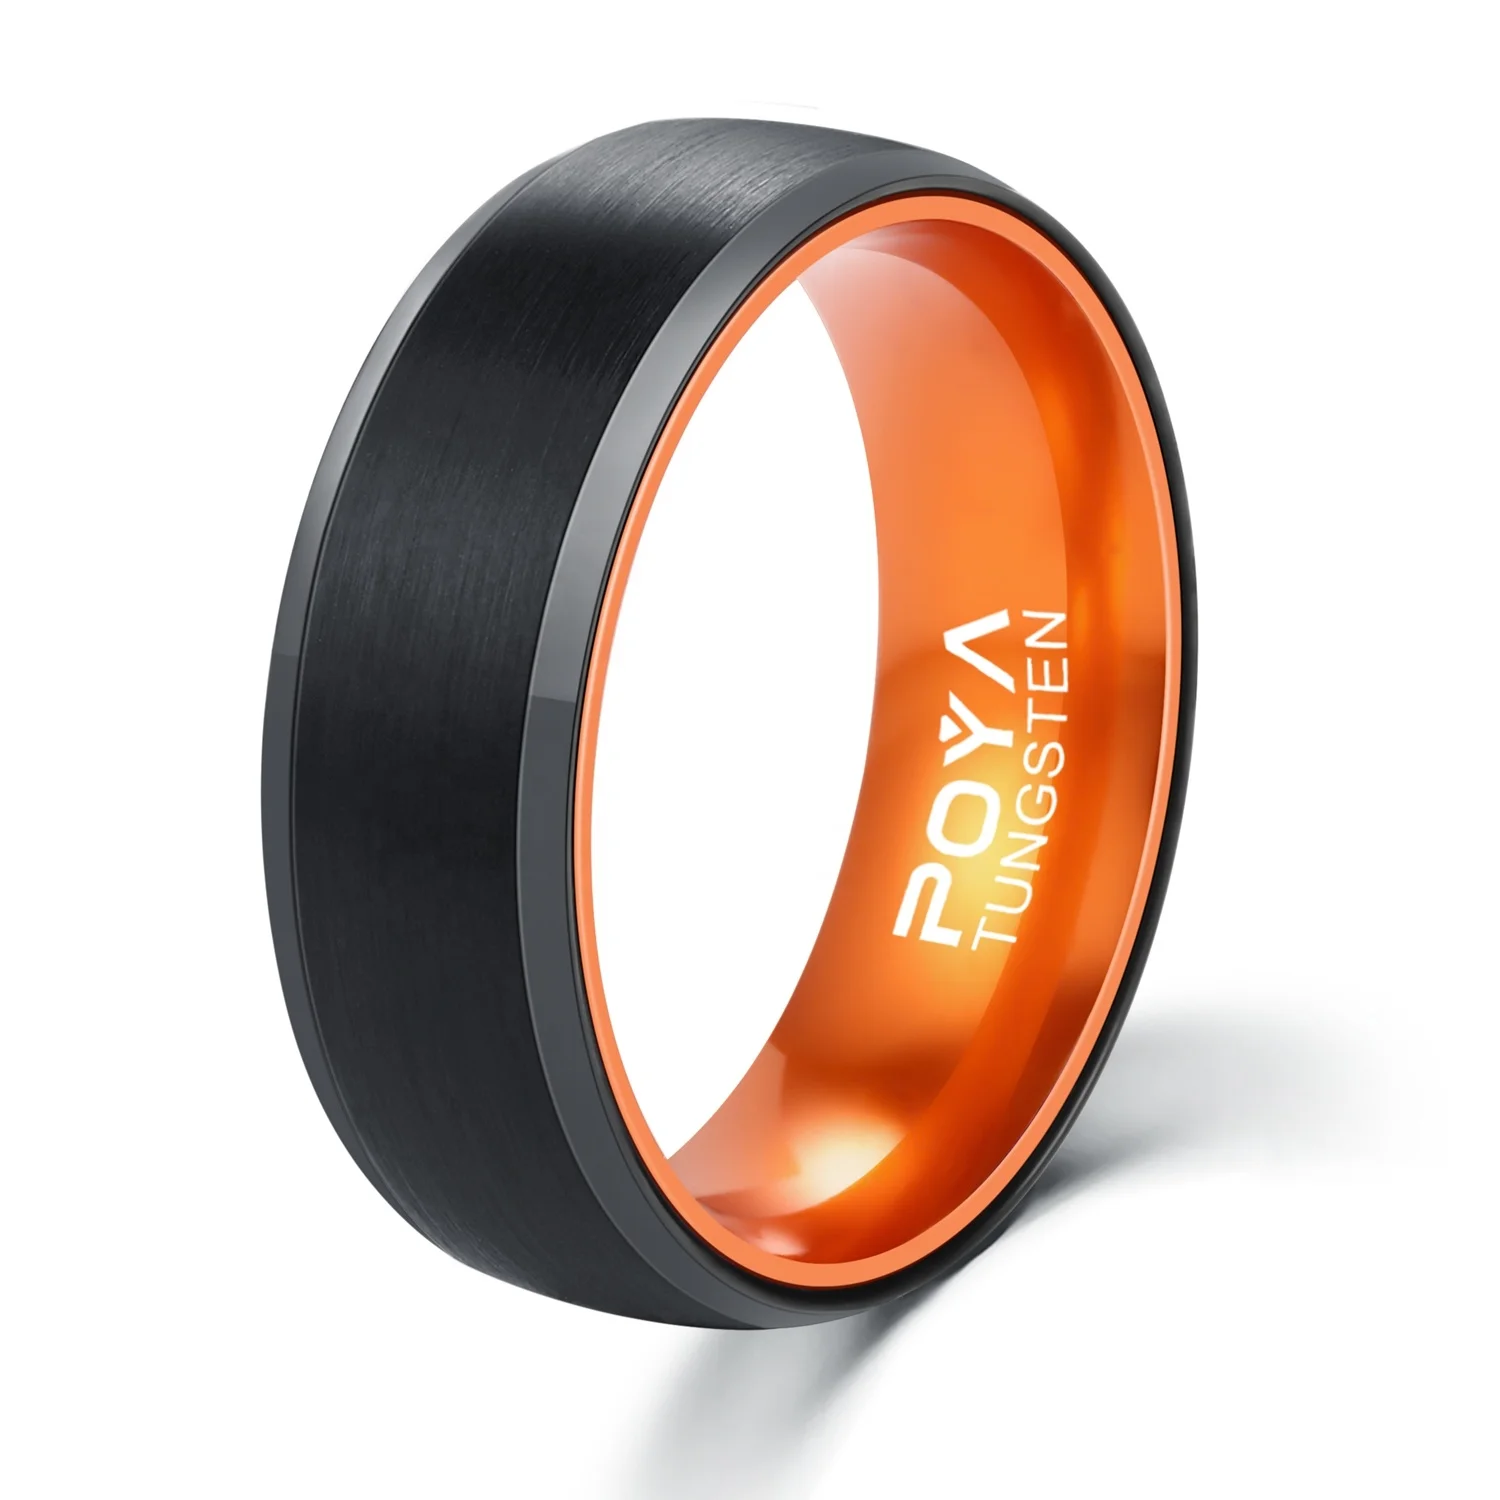 

POYA Jewelry 8mm Men's Tungsten Carbide Black and Orange Wedding Band Engagement Ring Anodized Aluminum Interior Comfort fit